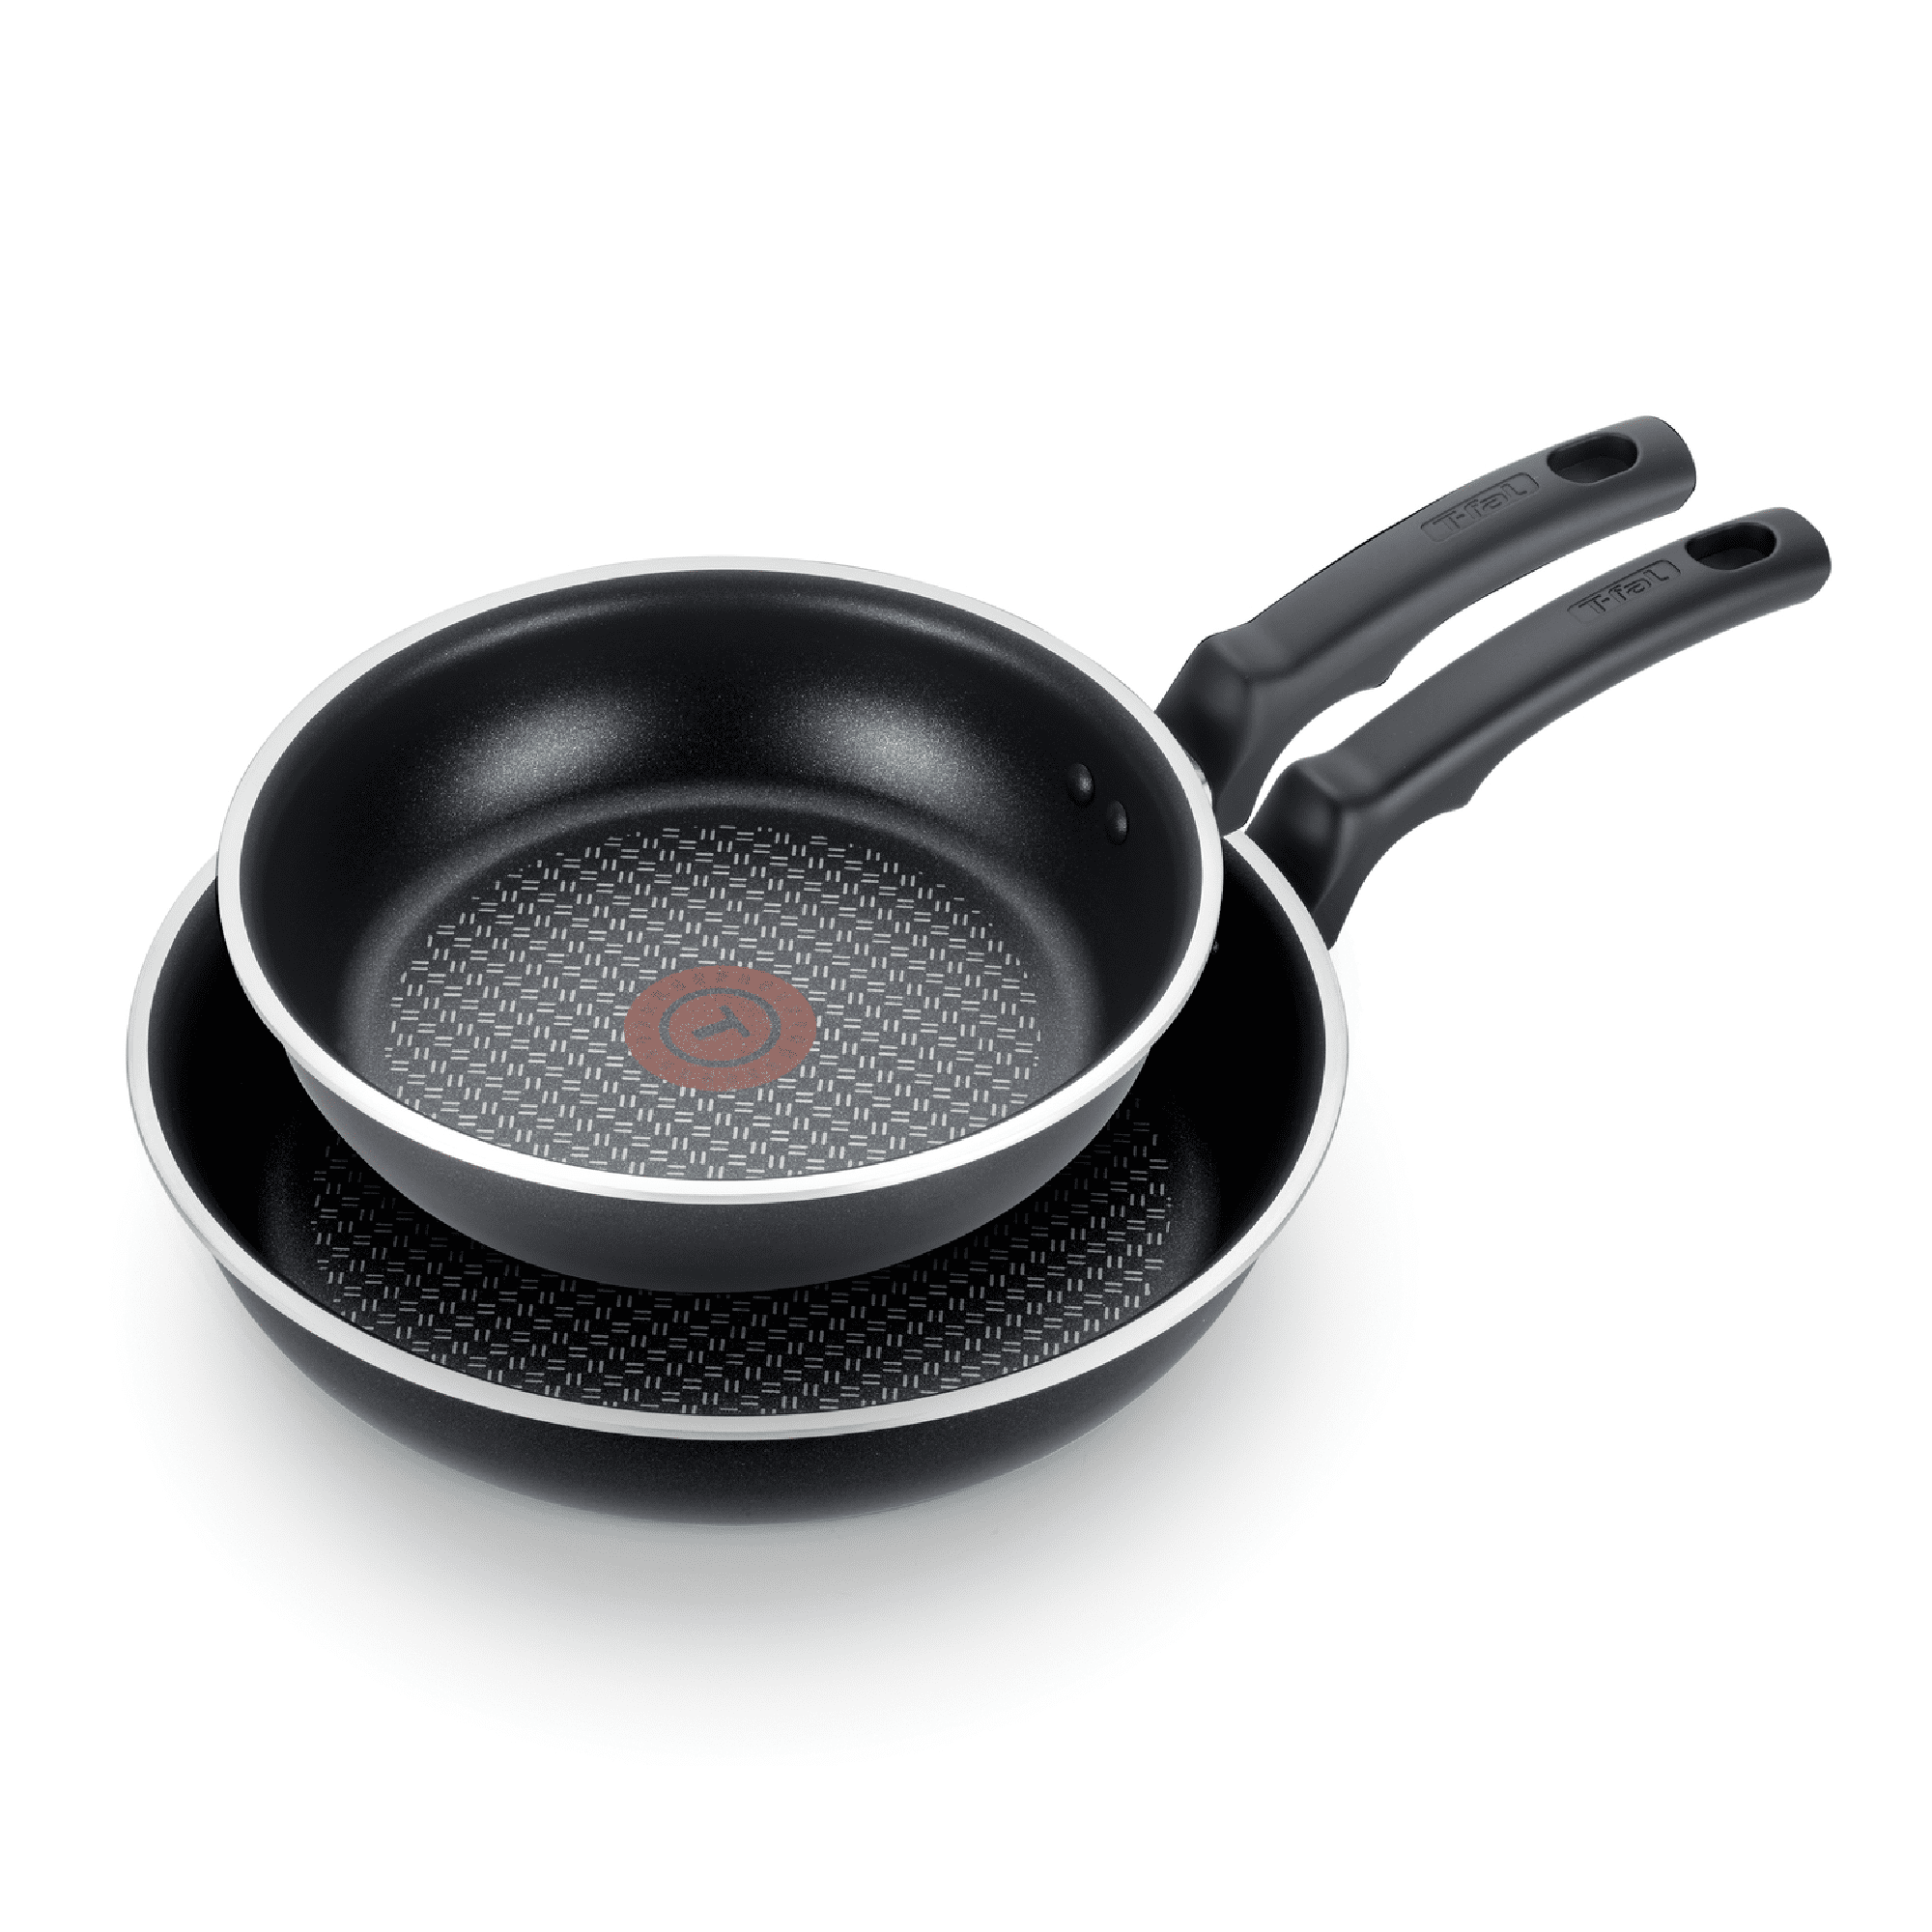 T-fal Cook & Strain Nonstick 2 Piece Fry Pan Cookware Set, 9.5 and 11 inch,  Black, Dishwasher Safe